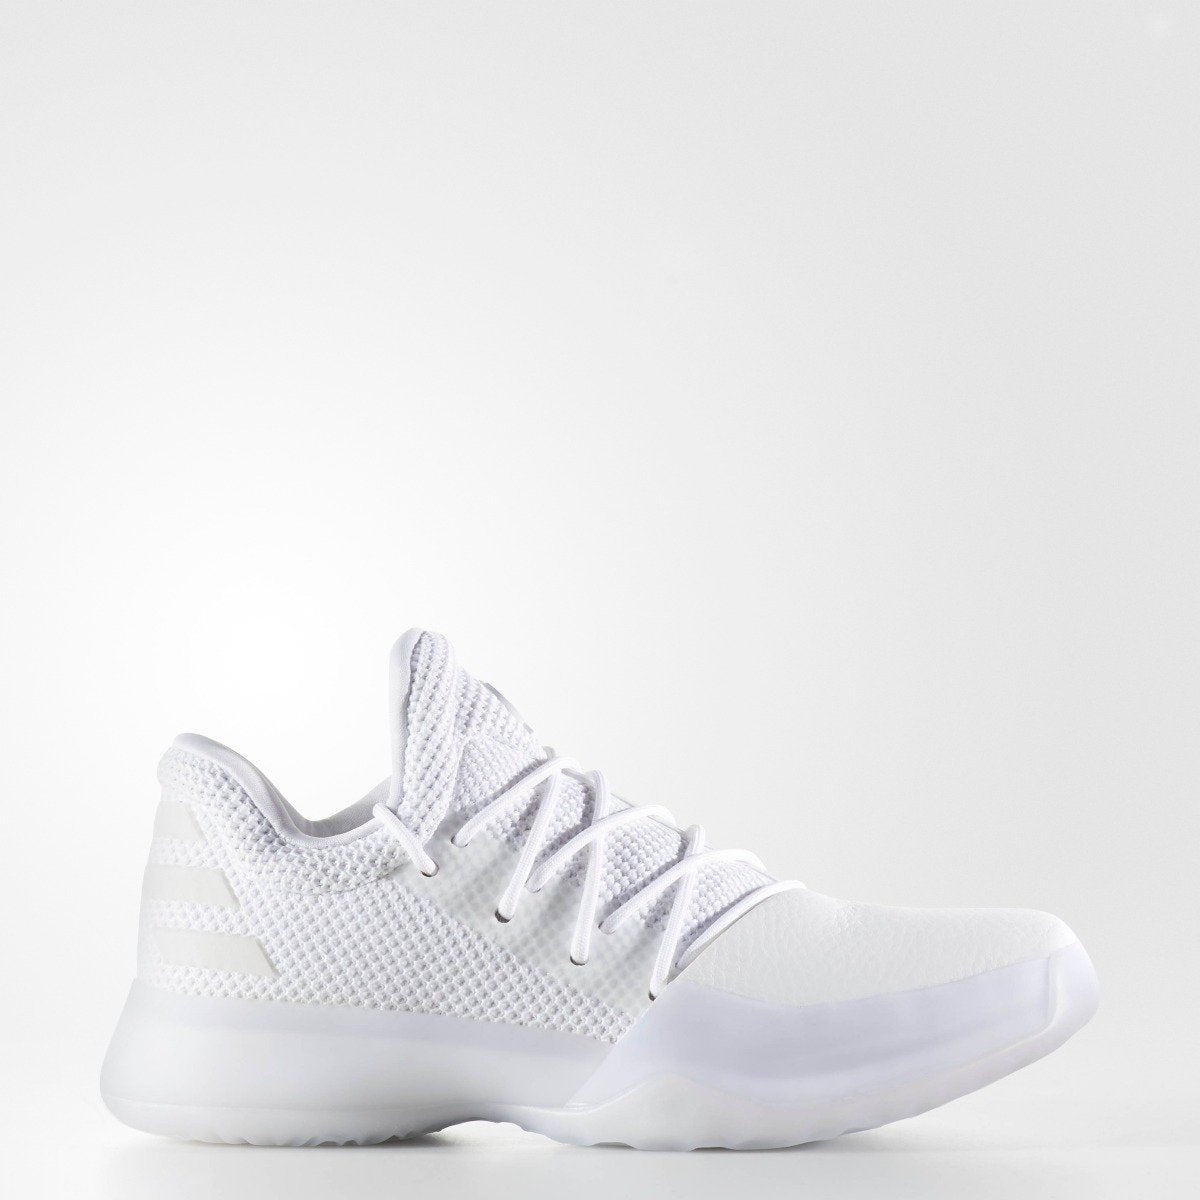 adidas Harden Vol.1 Shoes White Navy 